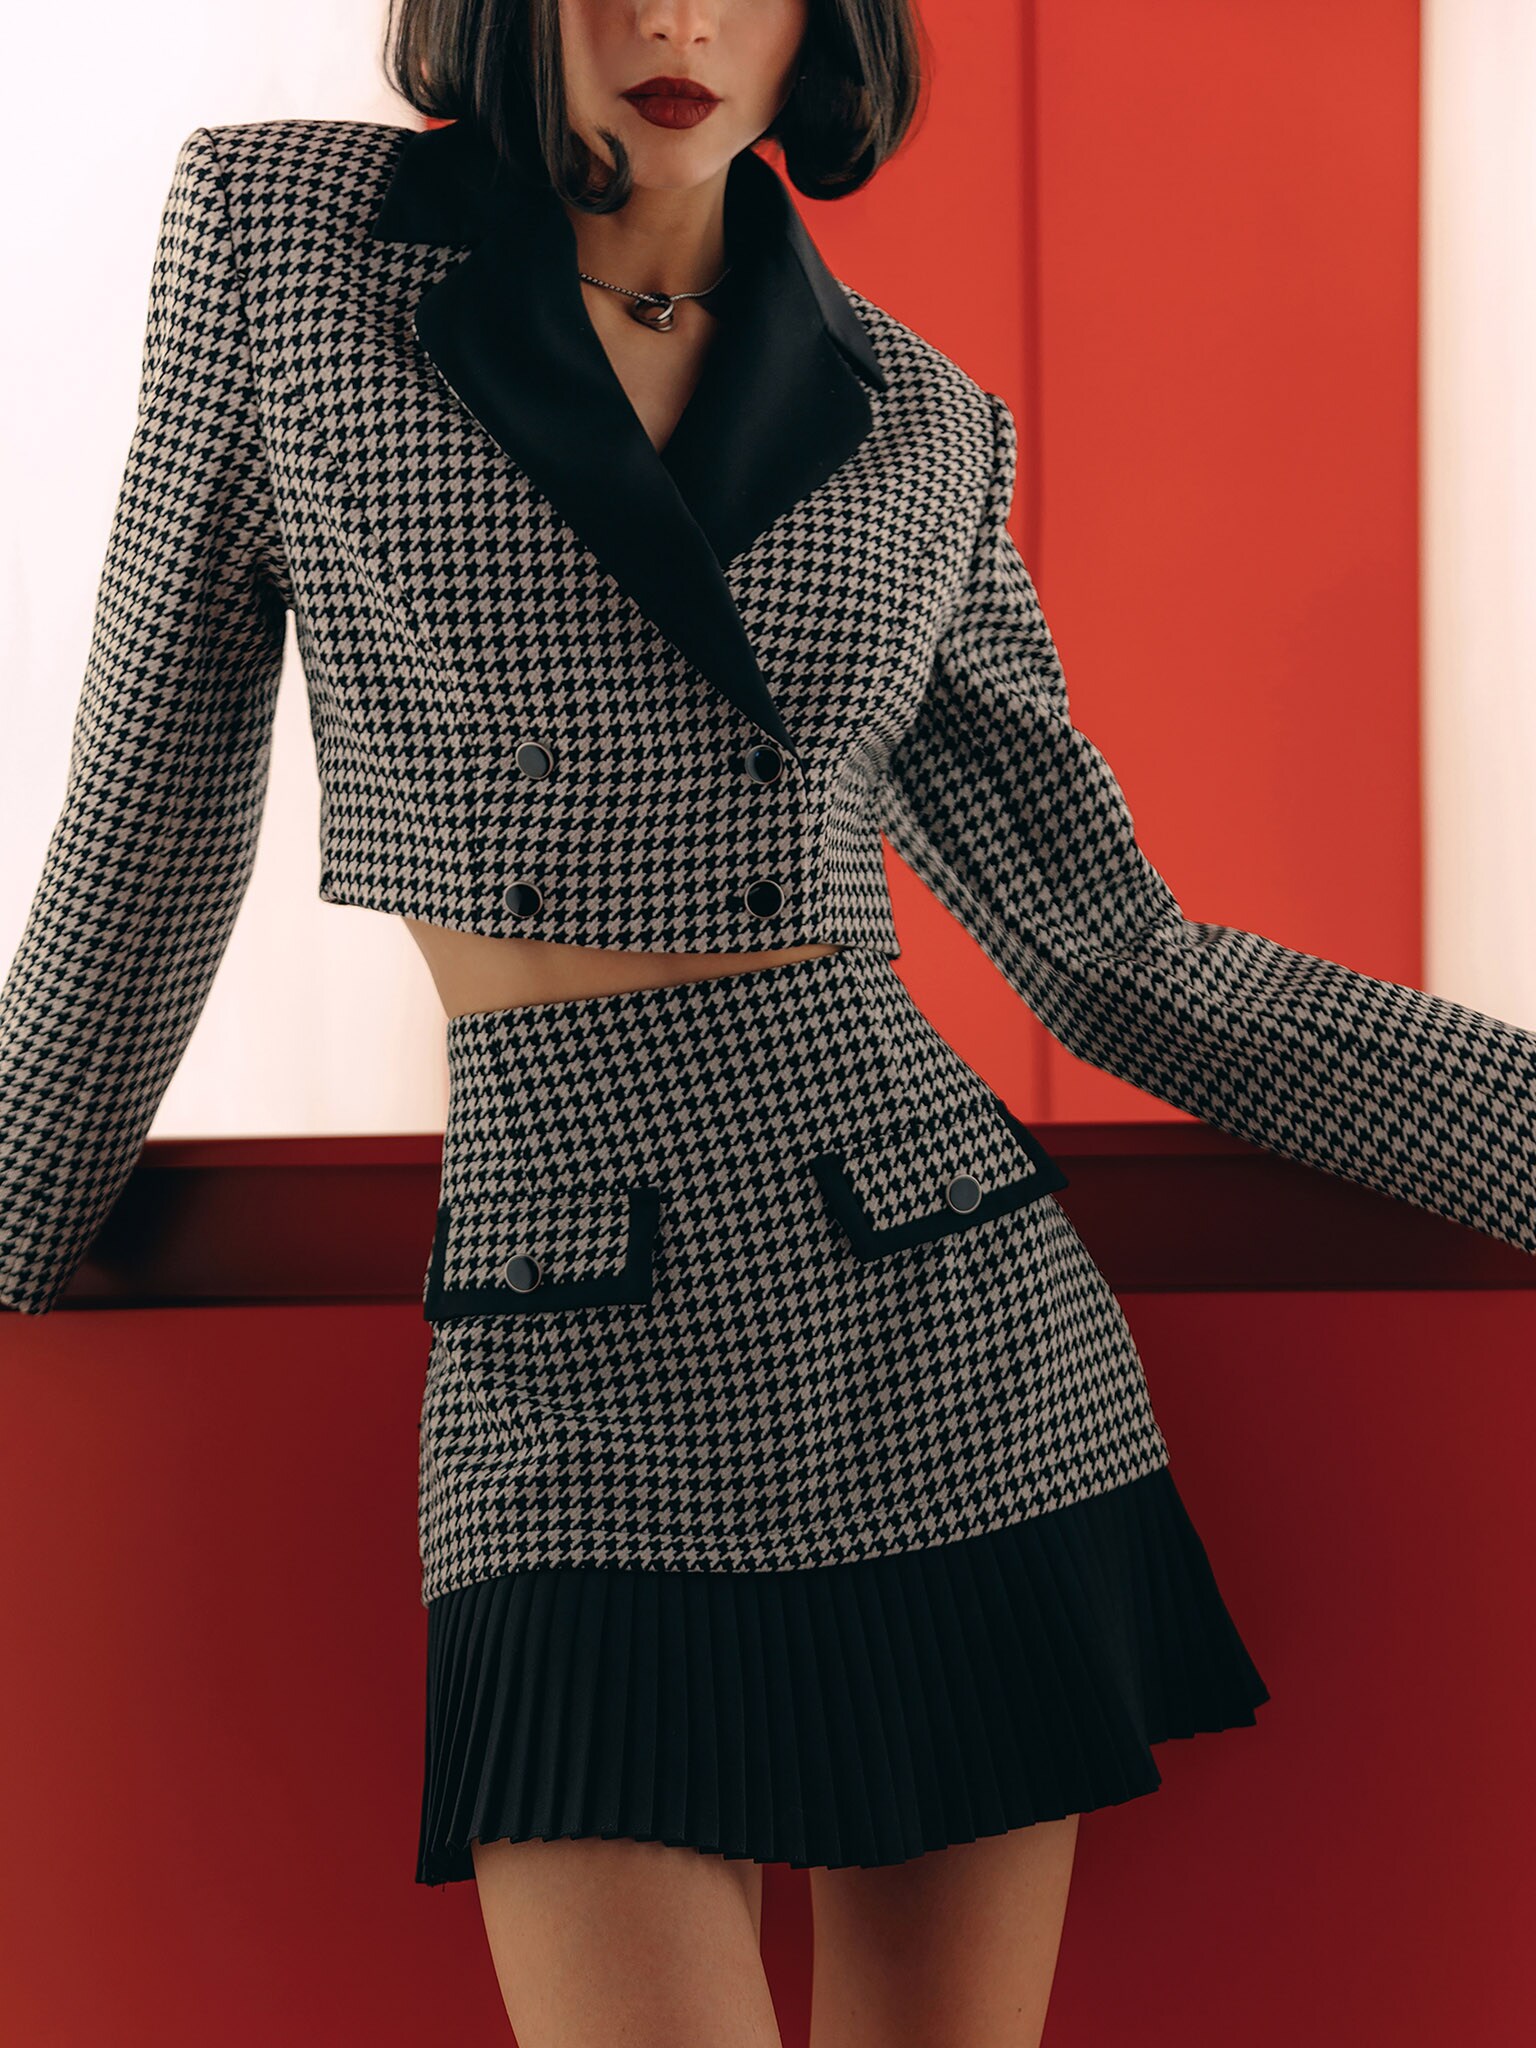 NYFW Day 0 - Houndstooth Suit — christie ferrari | Chic winter outfits,  Nyfw outfits, Winter fashion outfits